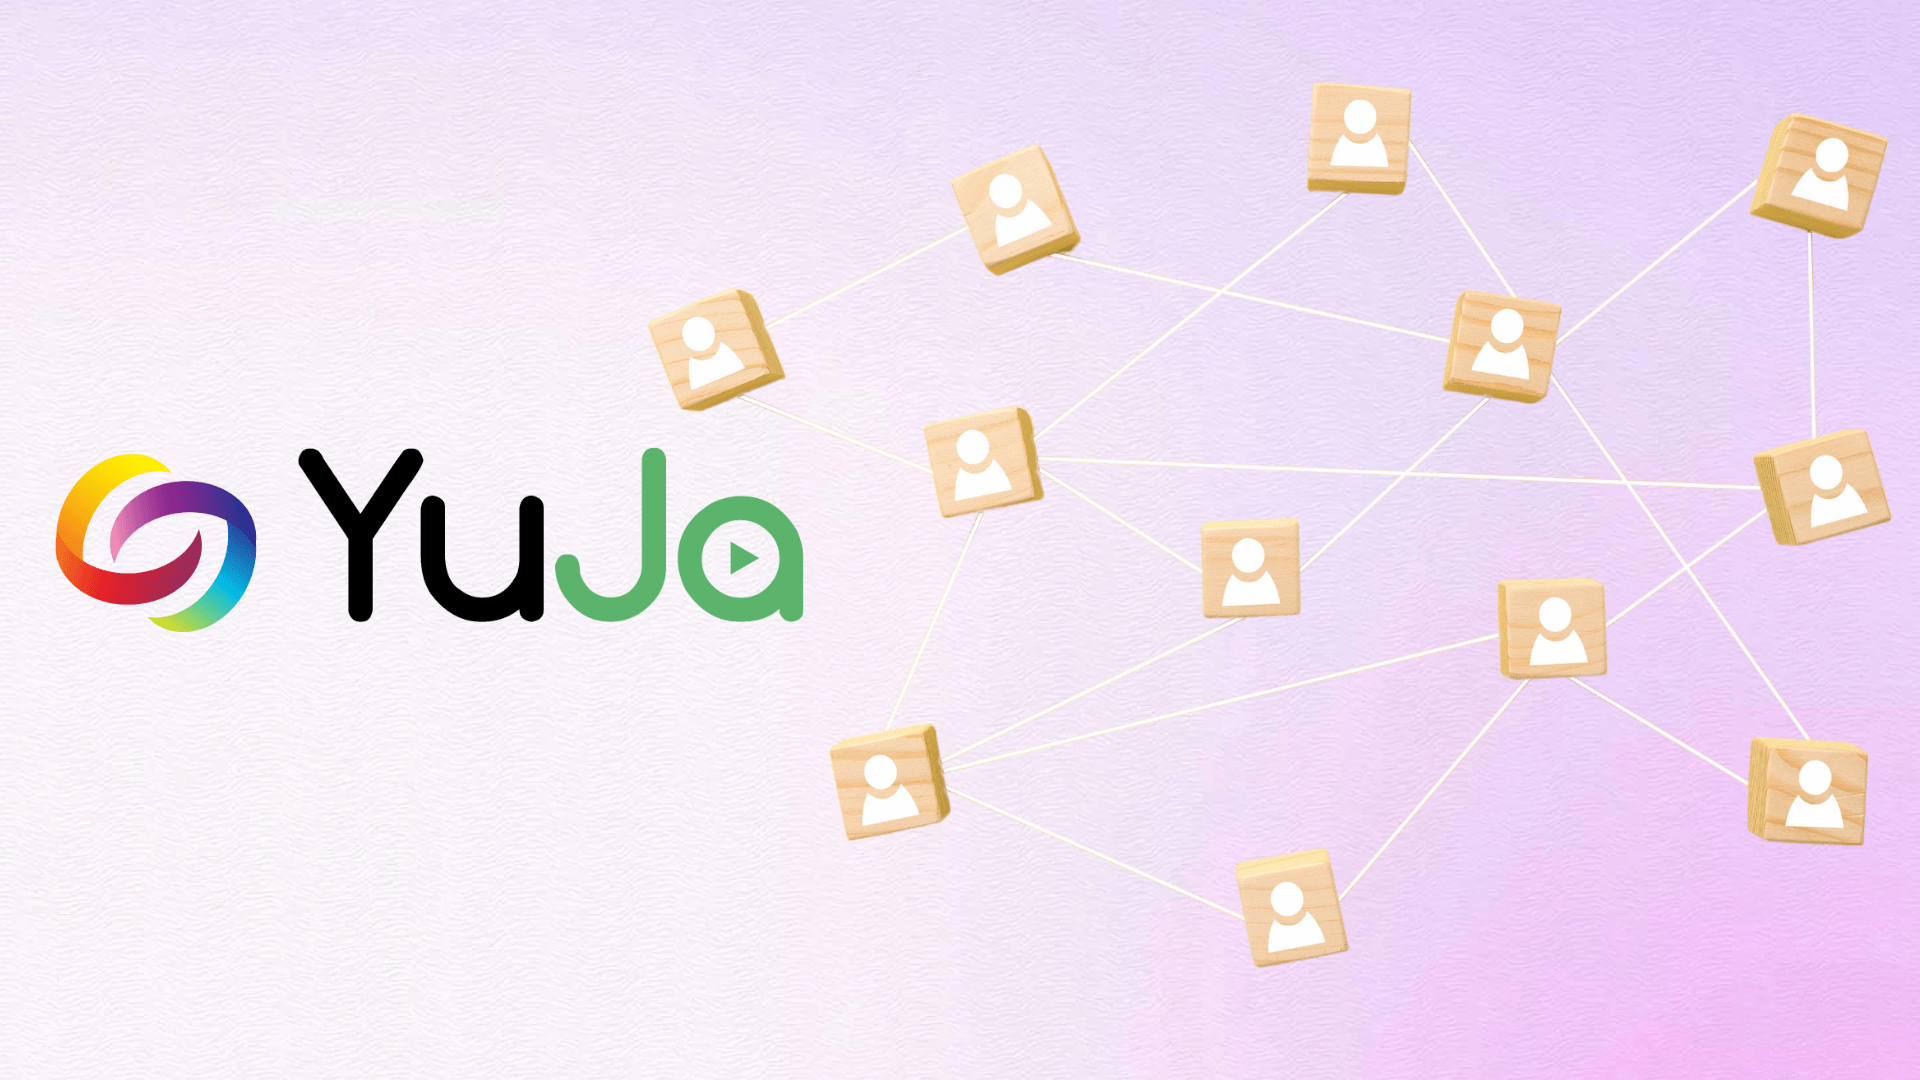 YuJa logo surrounded by web of icons to show community.